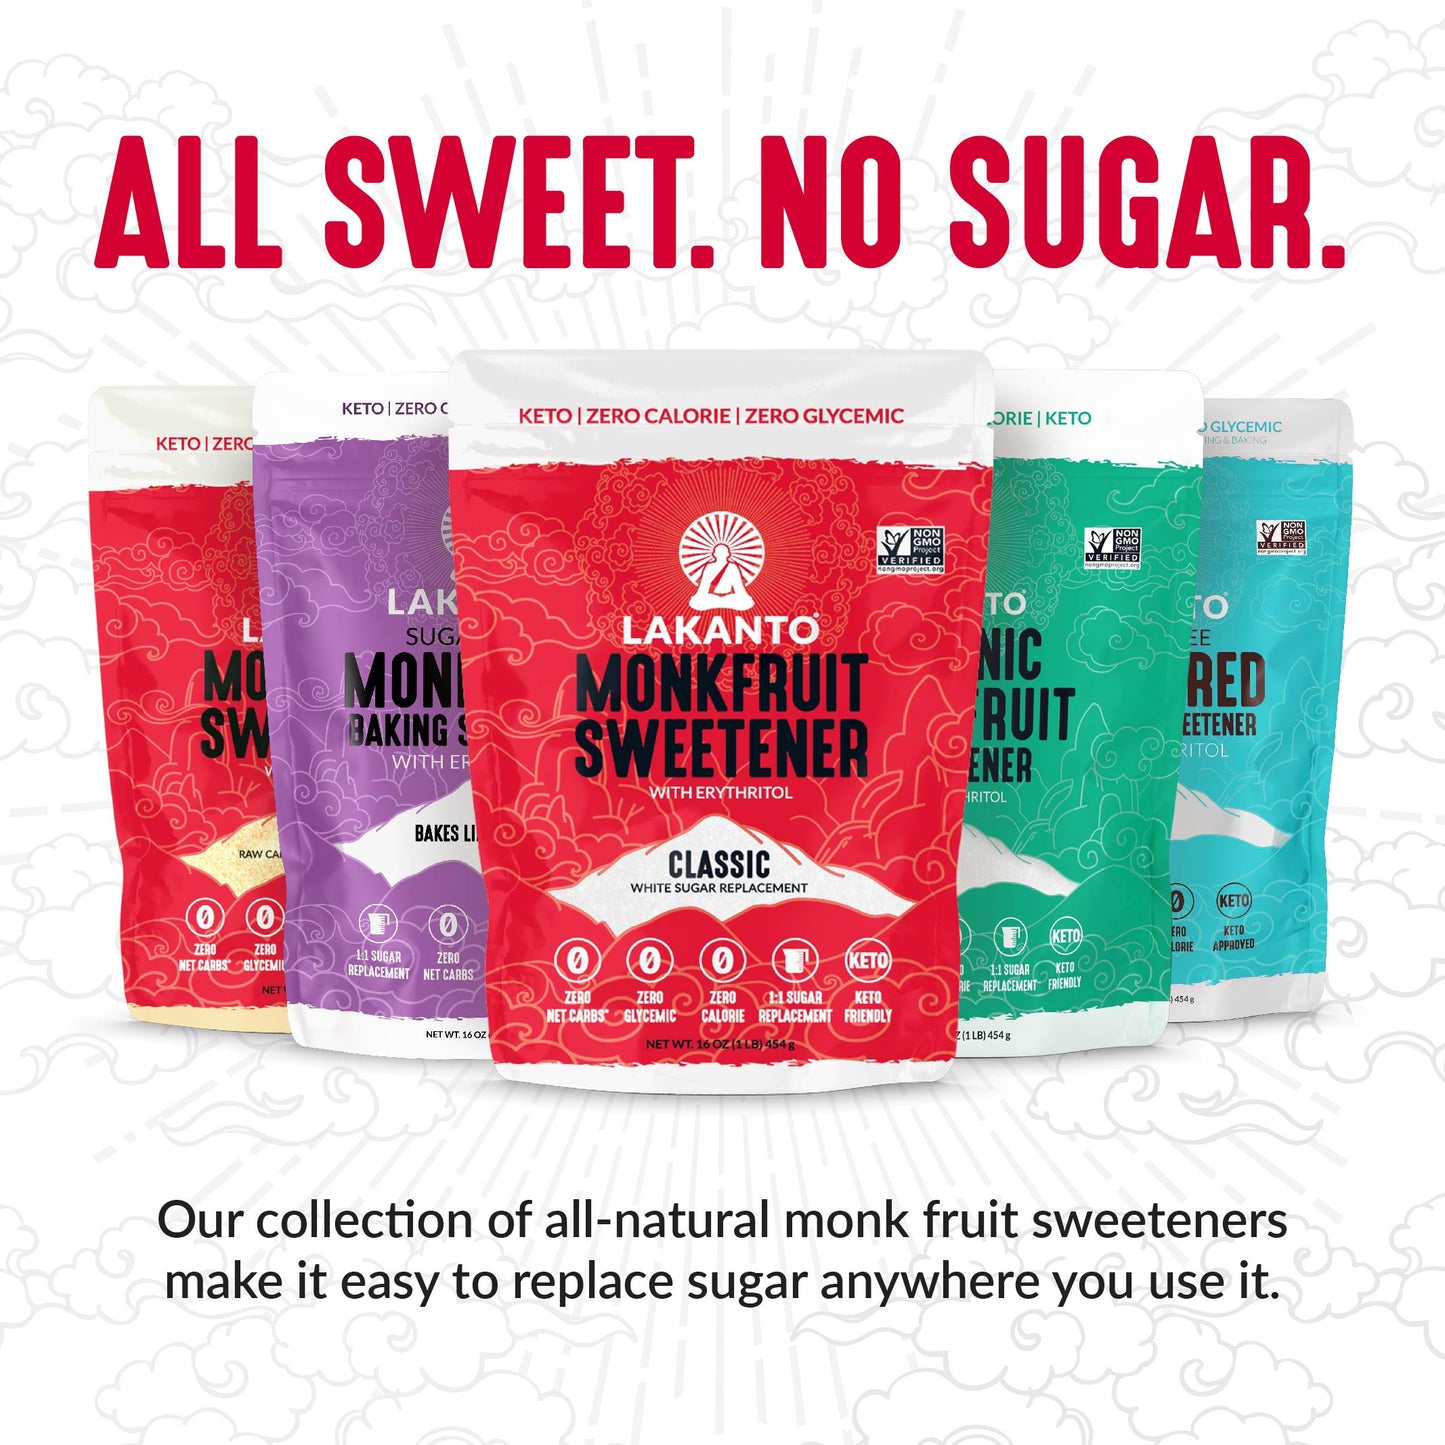 Golden Monkfruit and Erythritol 2:1 Sweetener Packets - Raw Cane Sugar Replacement